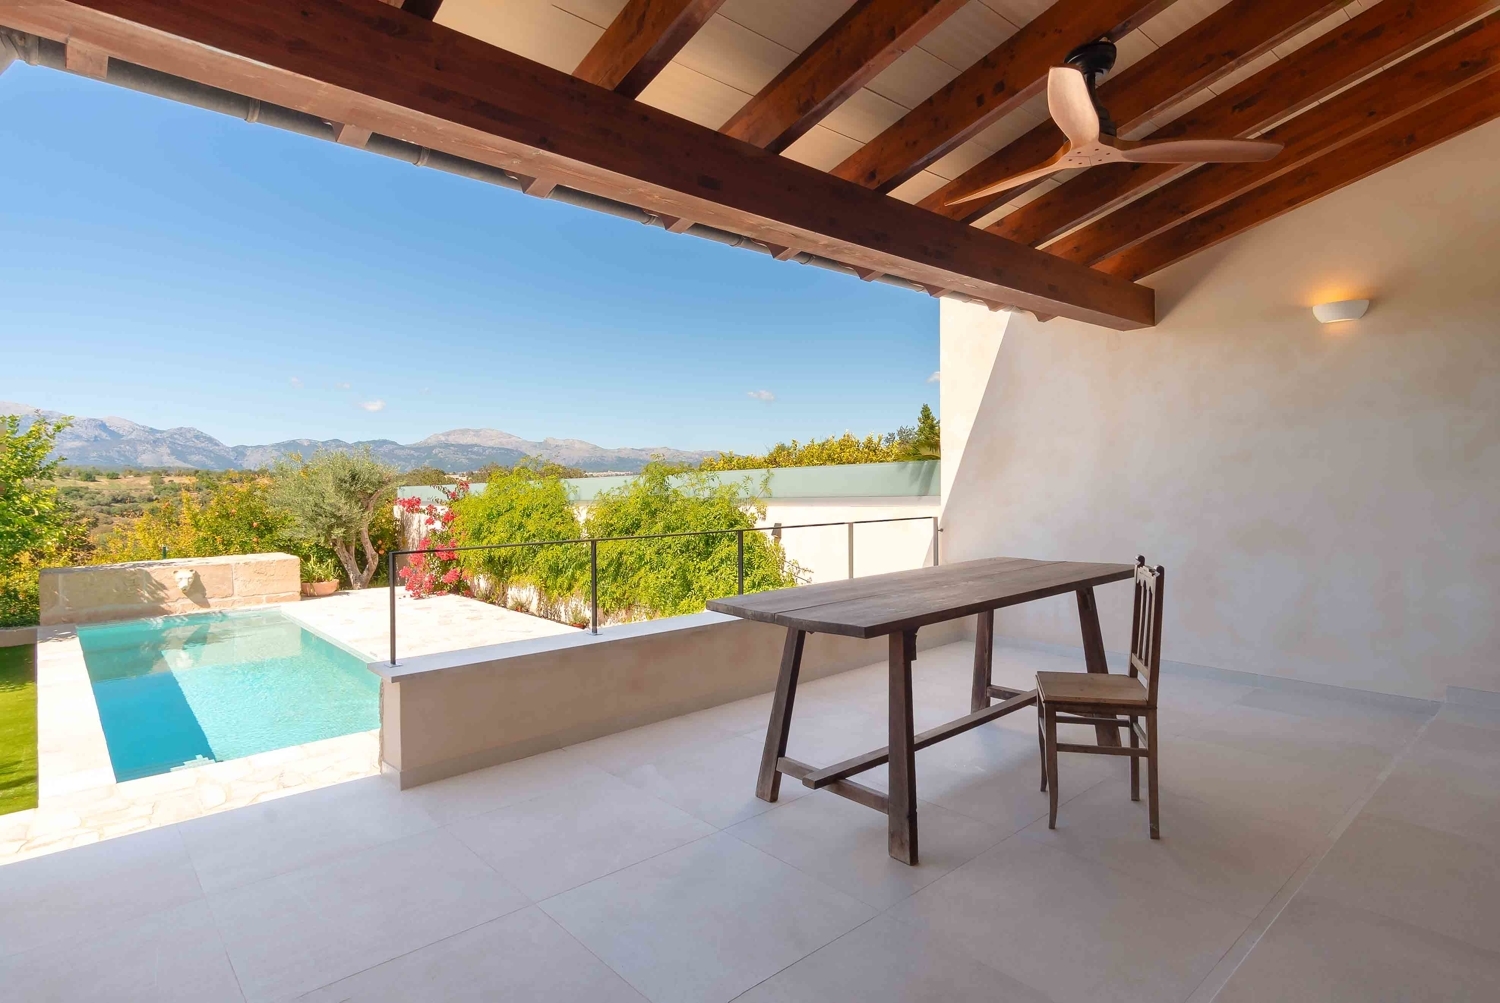 Exquisite renovated townhouse with pool and mountain views in Llubí